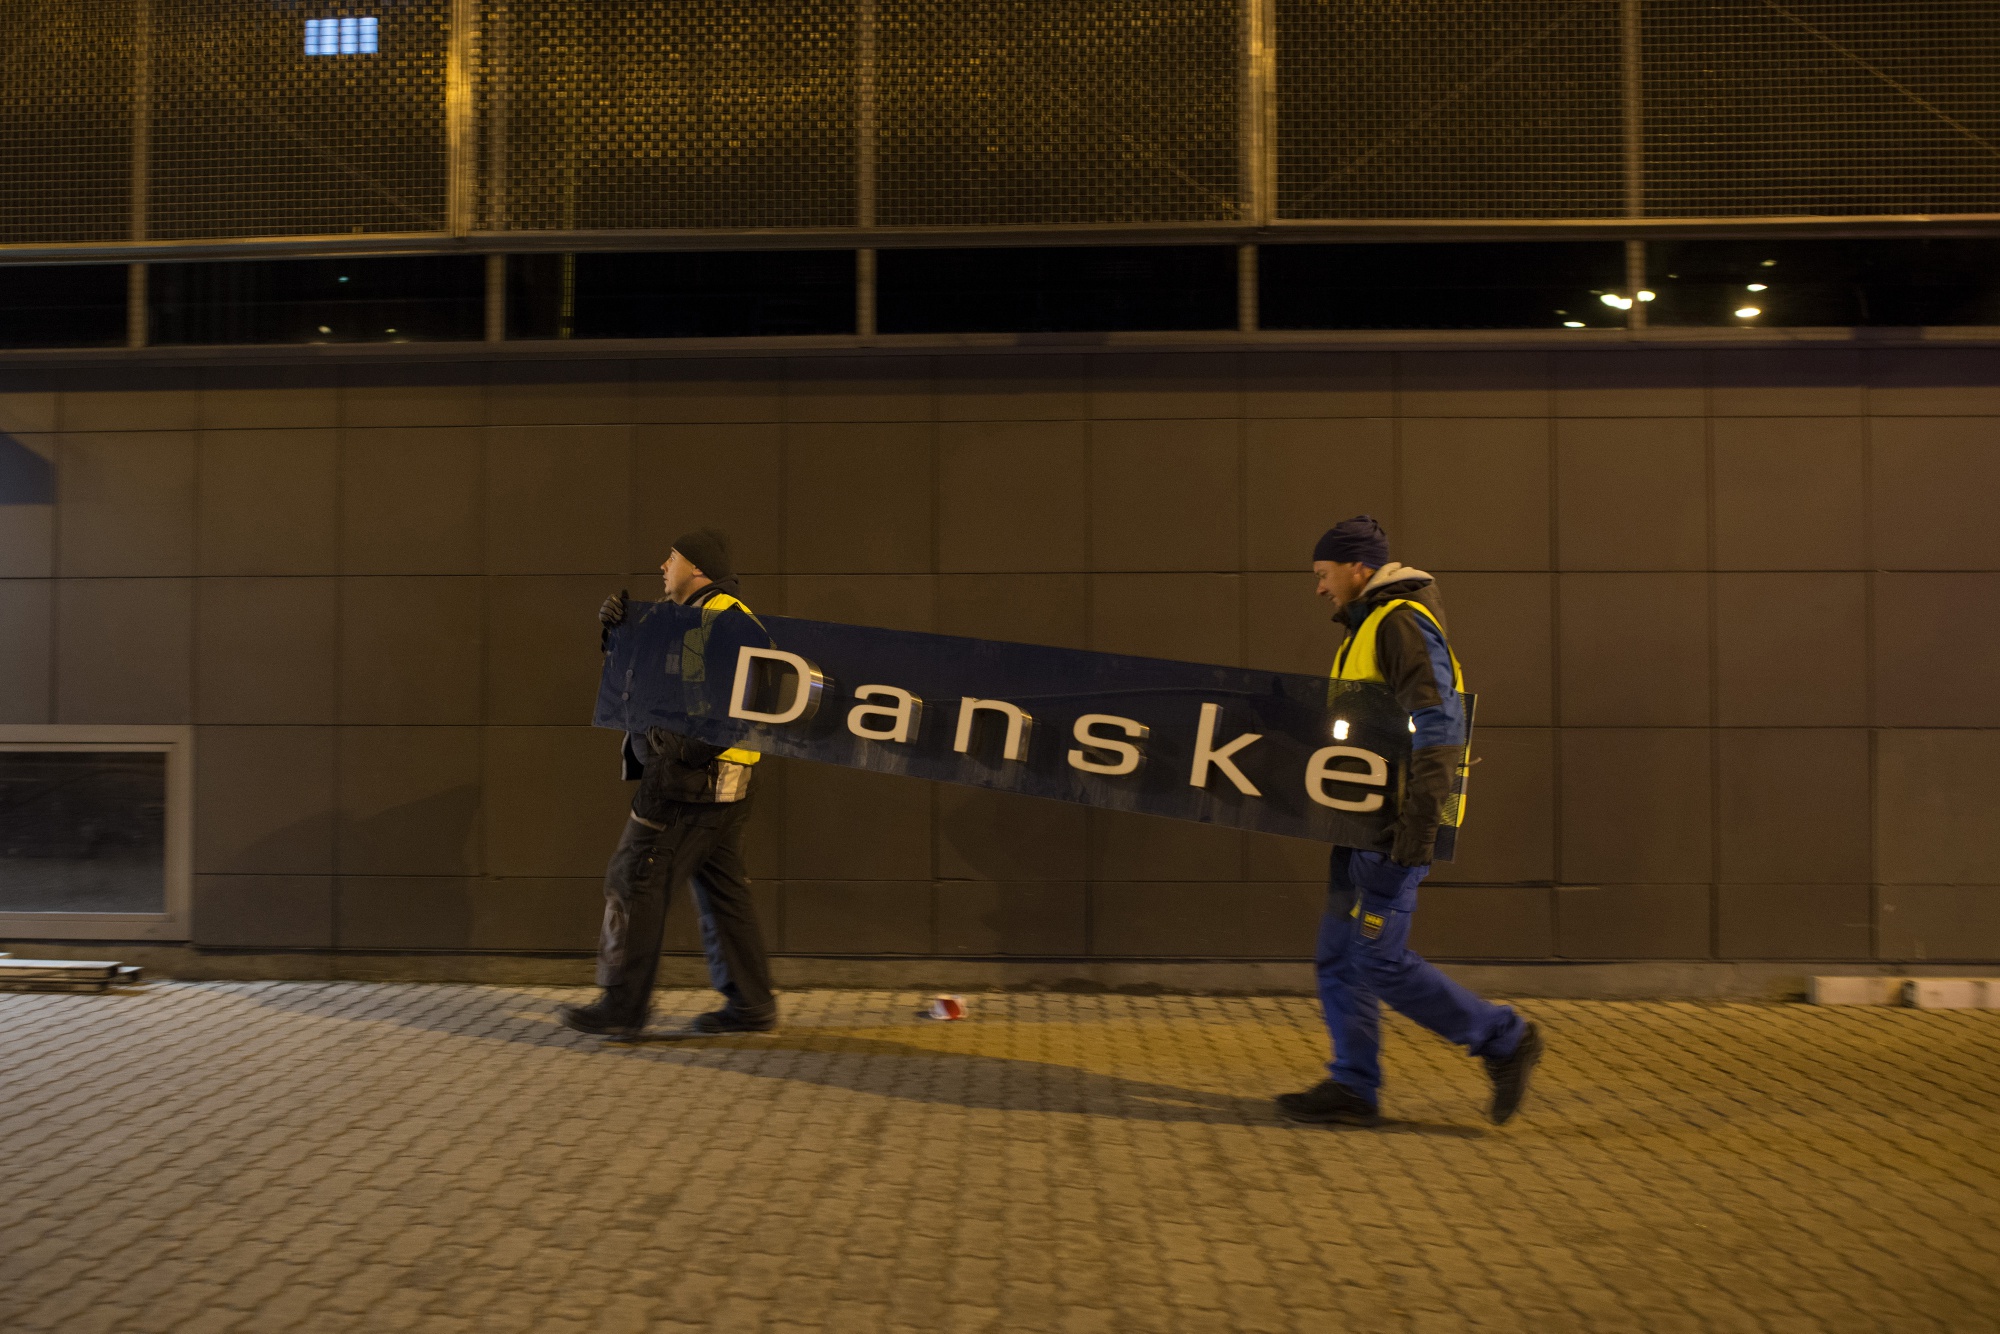 Workers remove Danske signage and carry it to a trailer at the former Danske Bank A/S branch in Tallinn, Estonia, on Oct. 5.